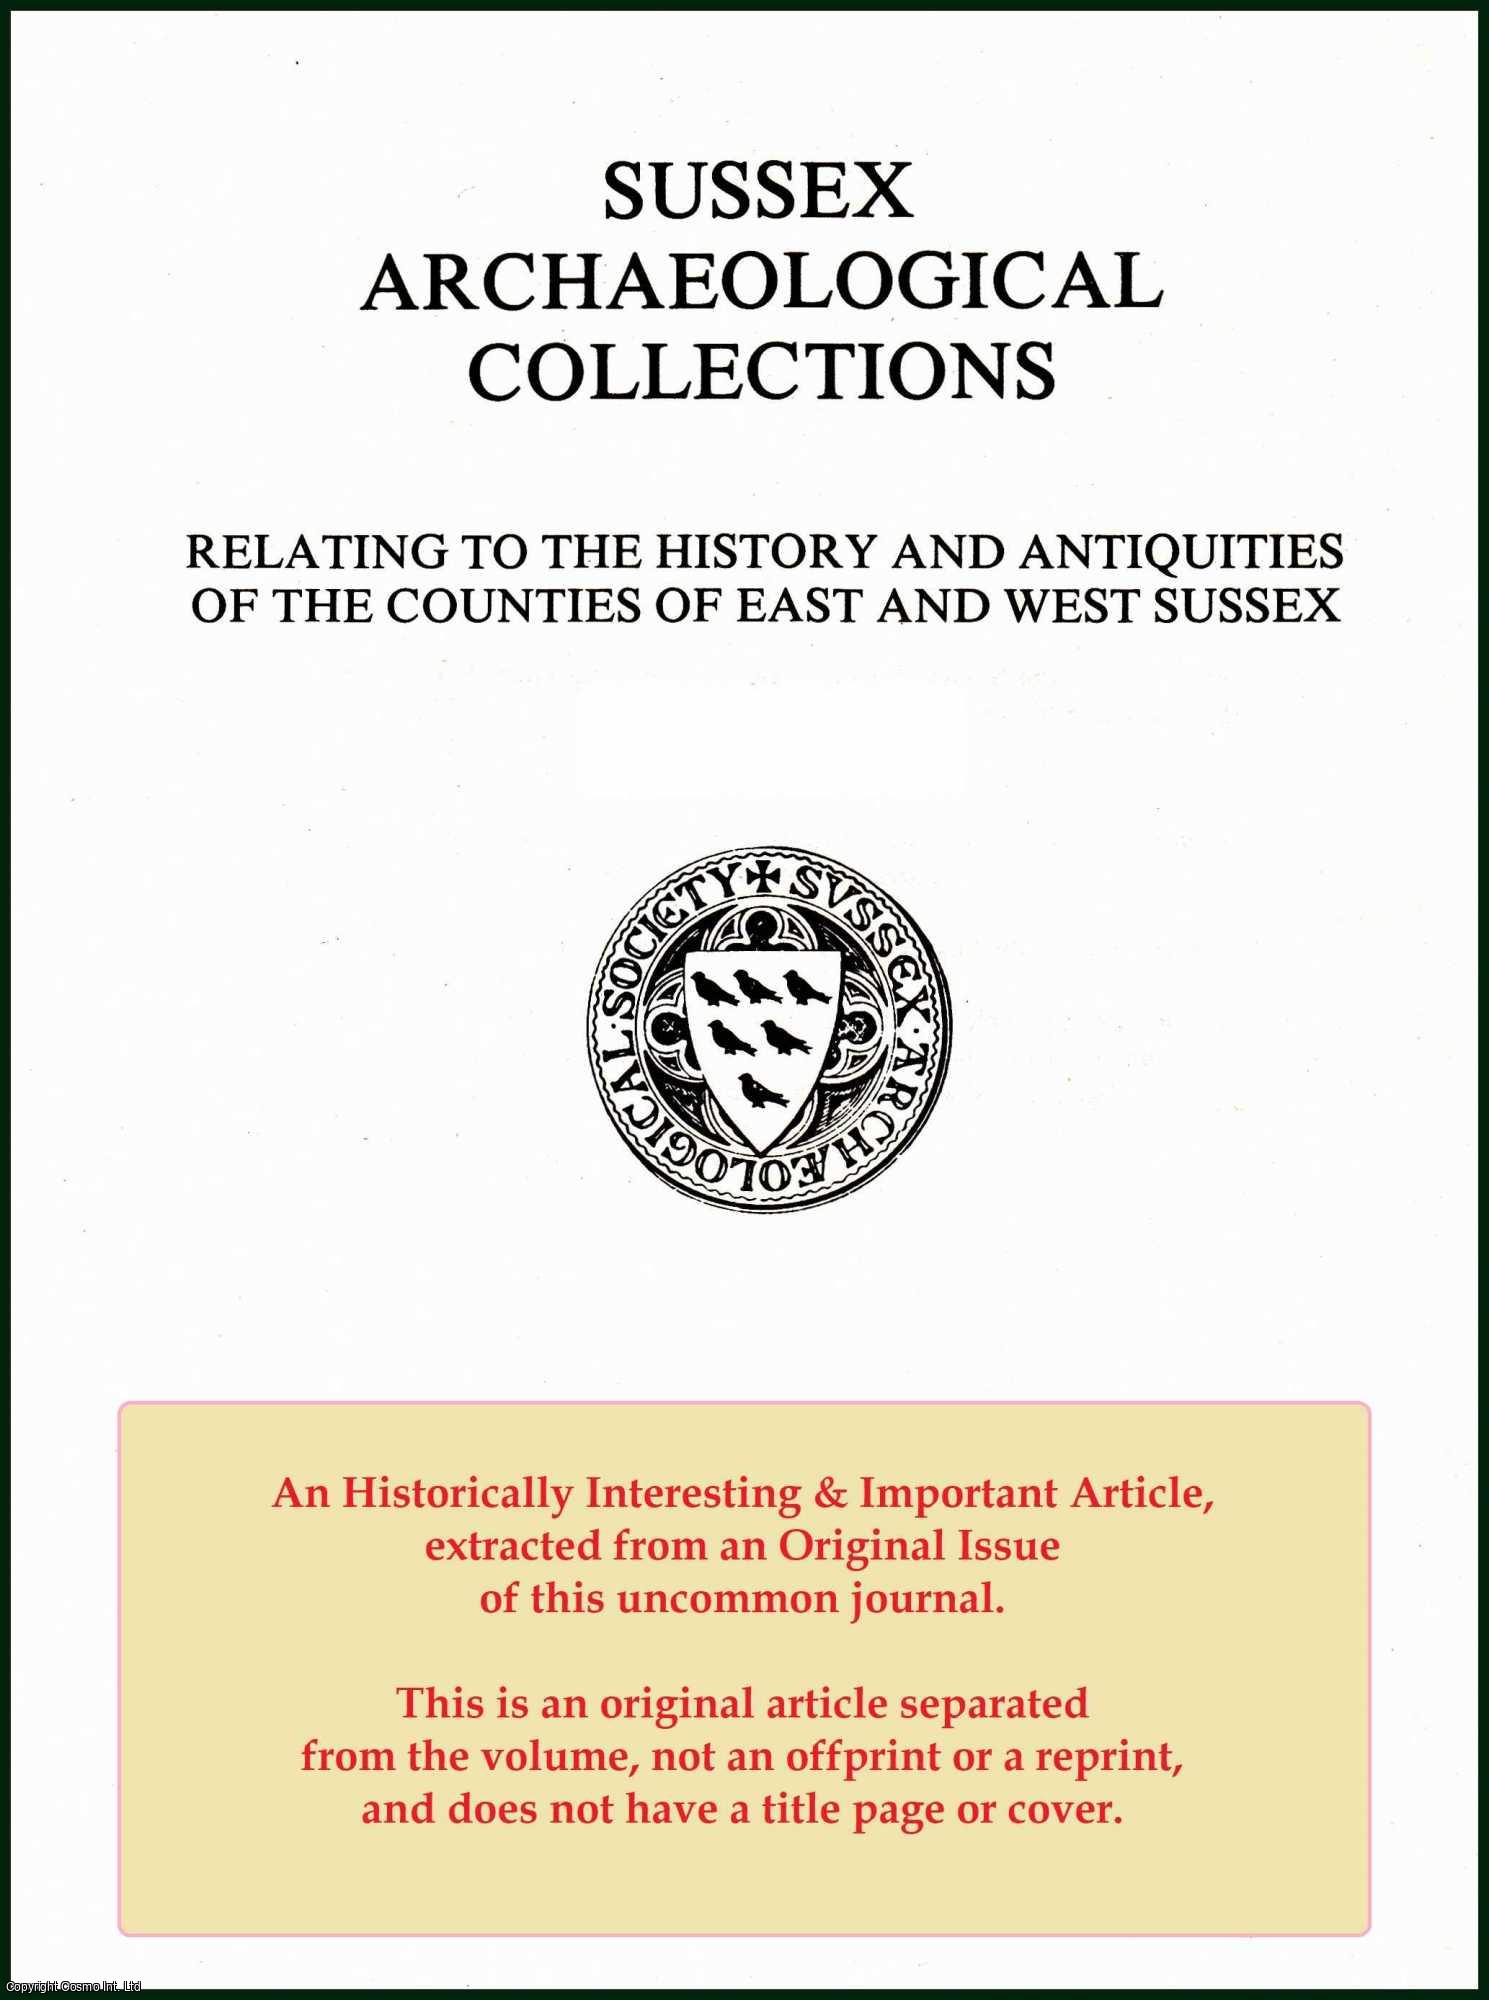 Eric E. Barker - Sussex Anglo-Saxon Charters. An original article from the Journal of the Sussex Archaeological Society, 1948.